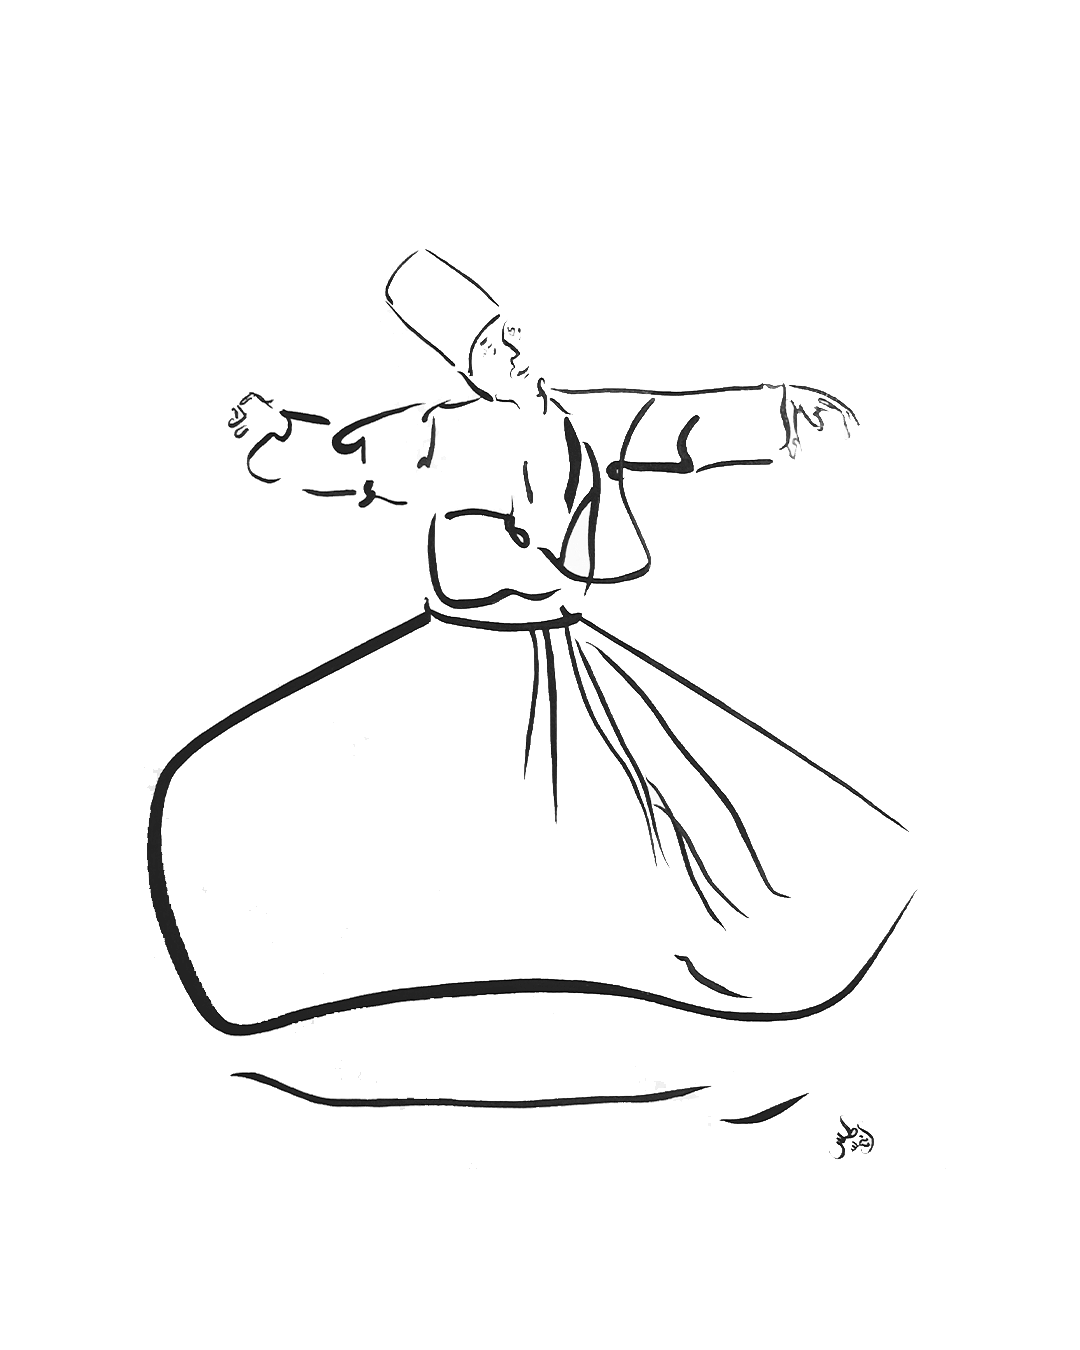 a whirling dervish pen and ink line drawing